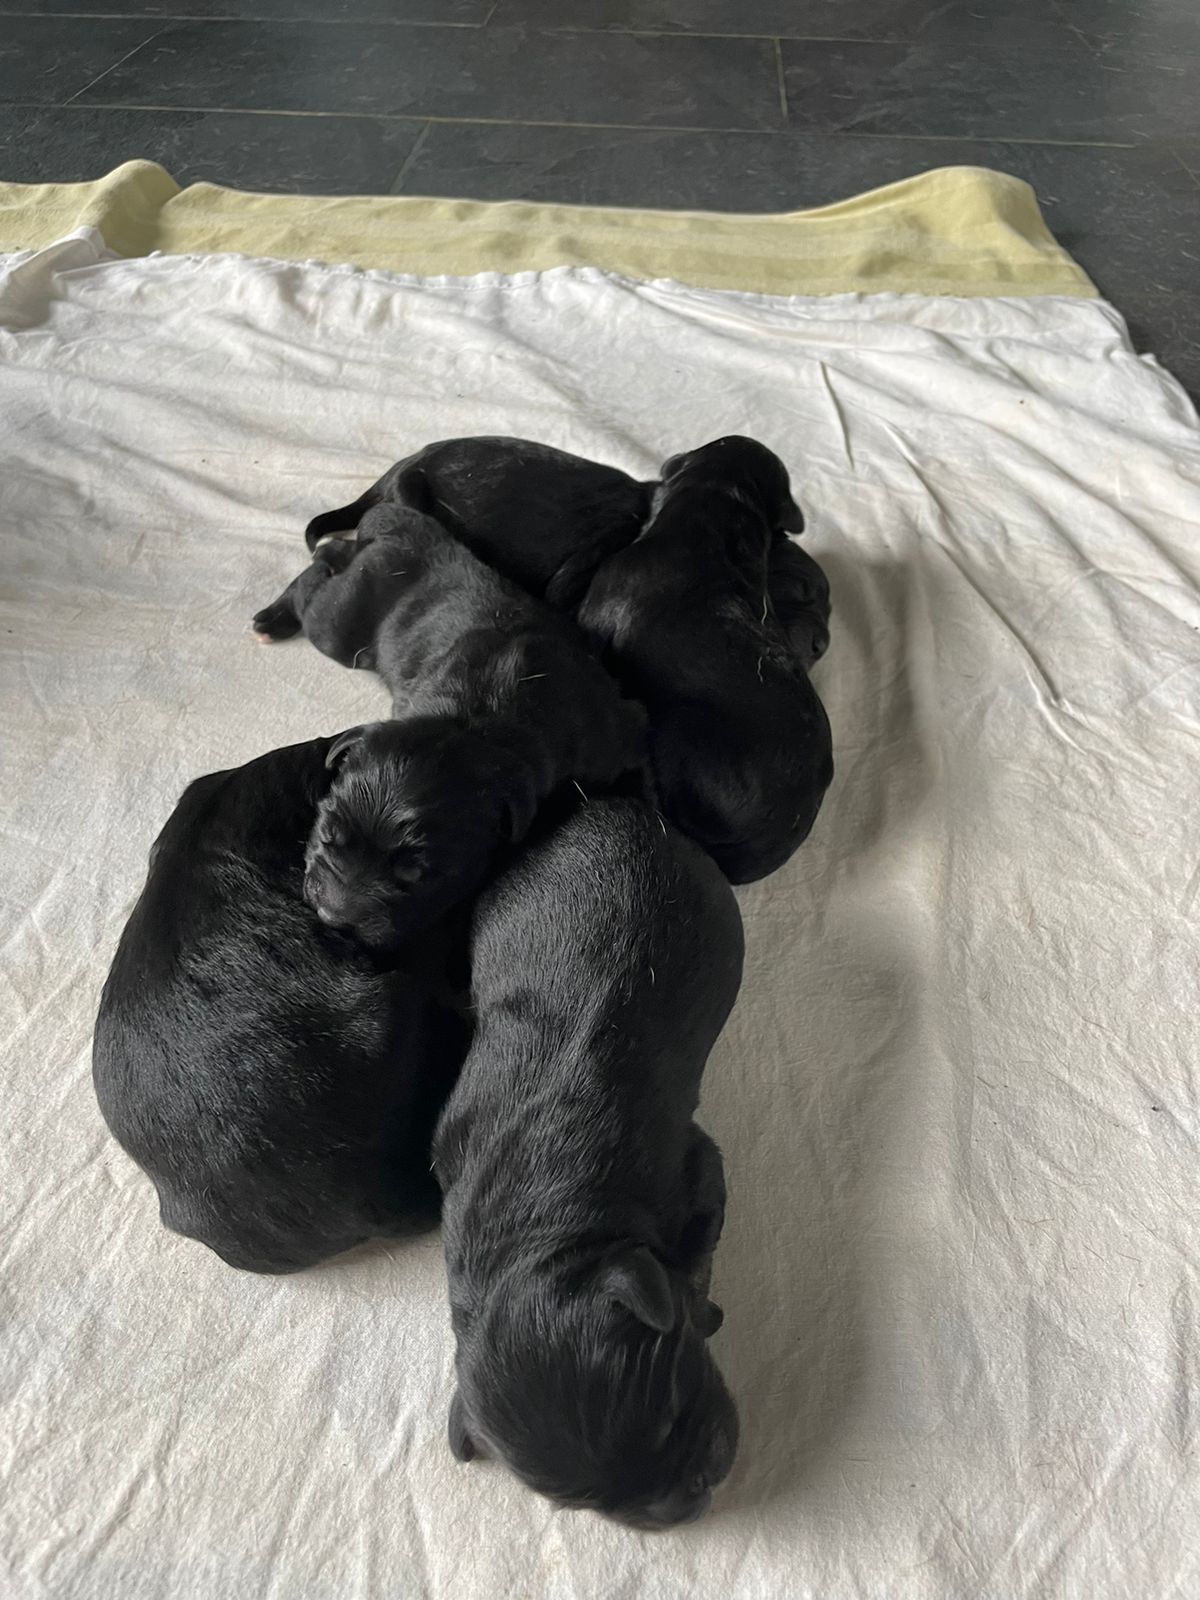 Five tiny black puppies in a little pile.